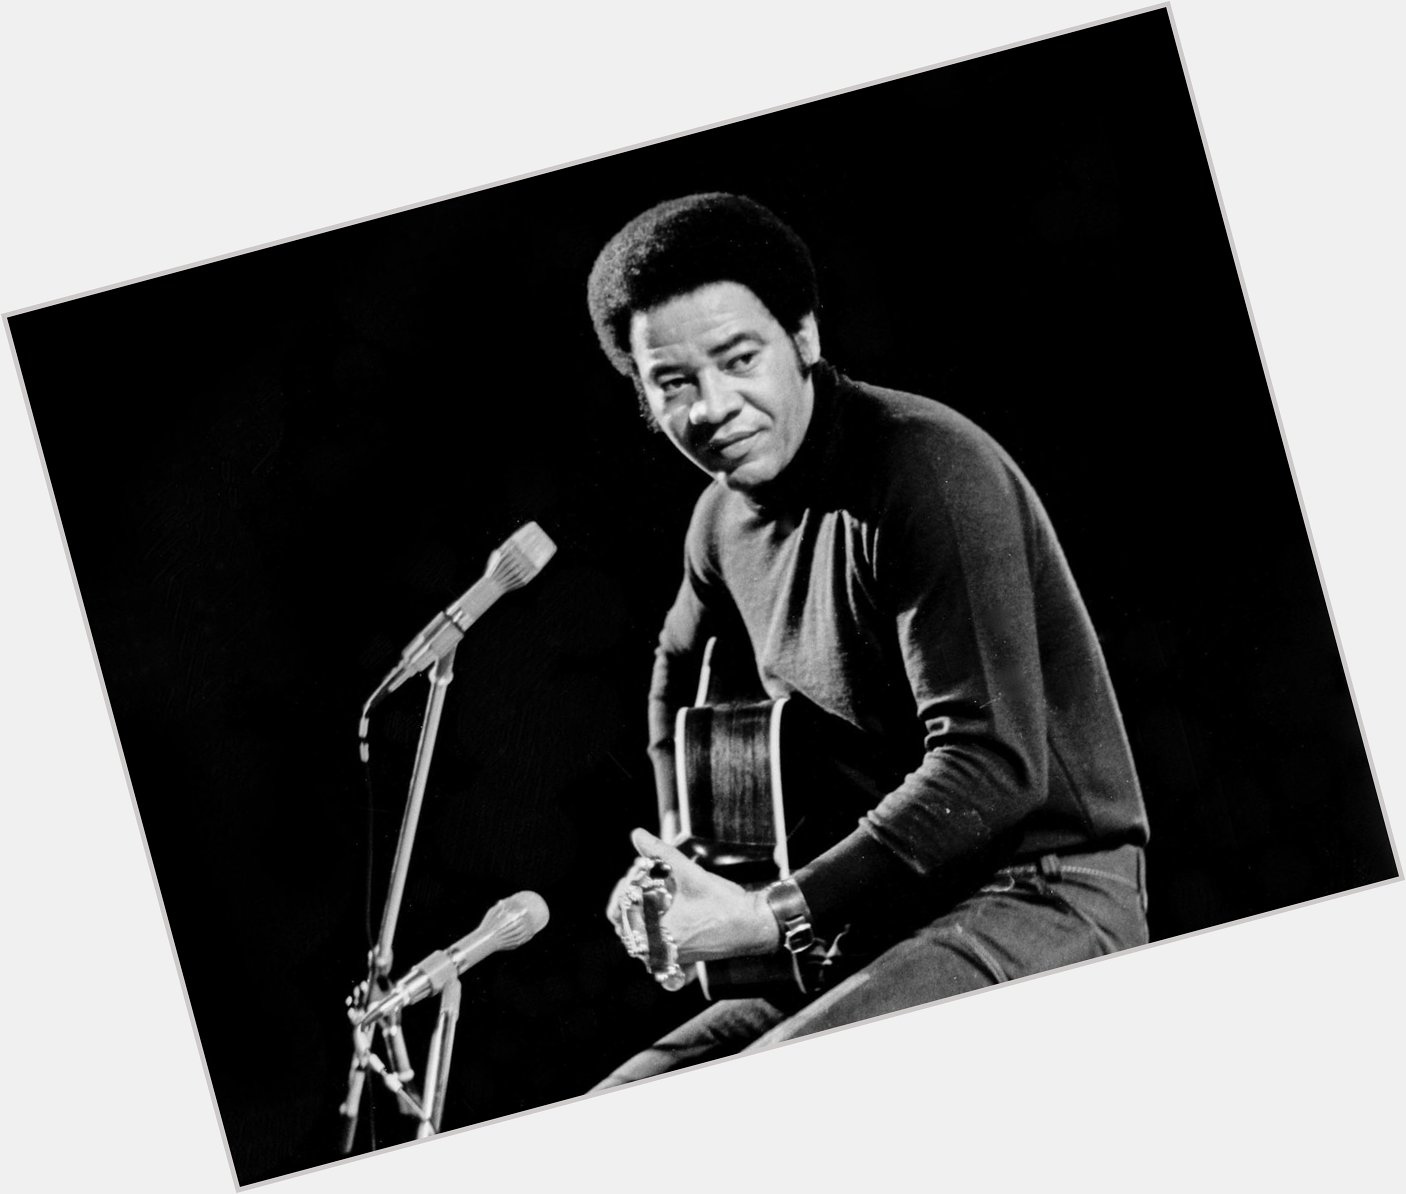 HAPPY BIRTHDAY BILL WITHERS. WE MISS YOU. 